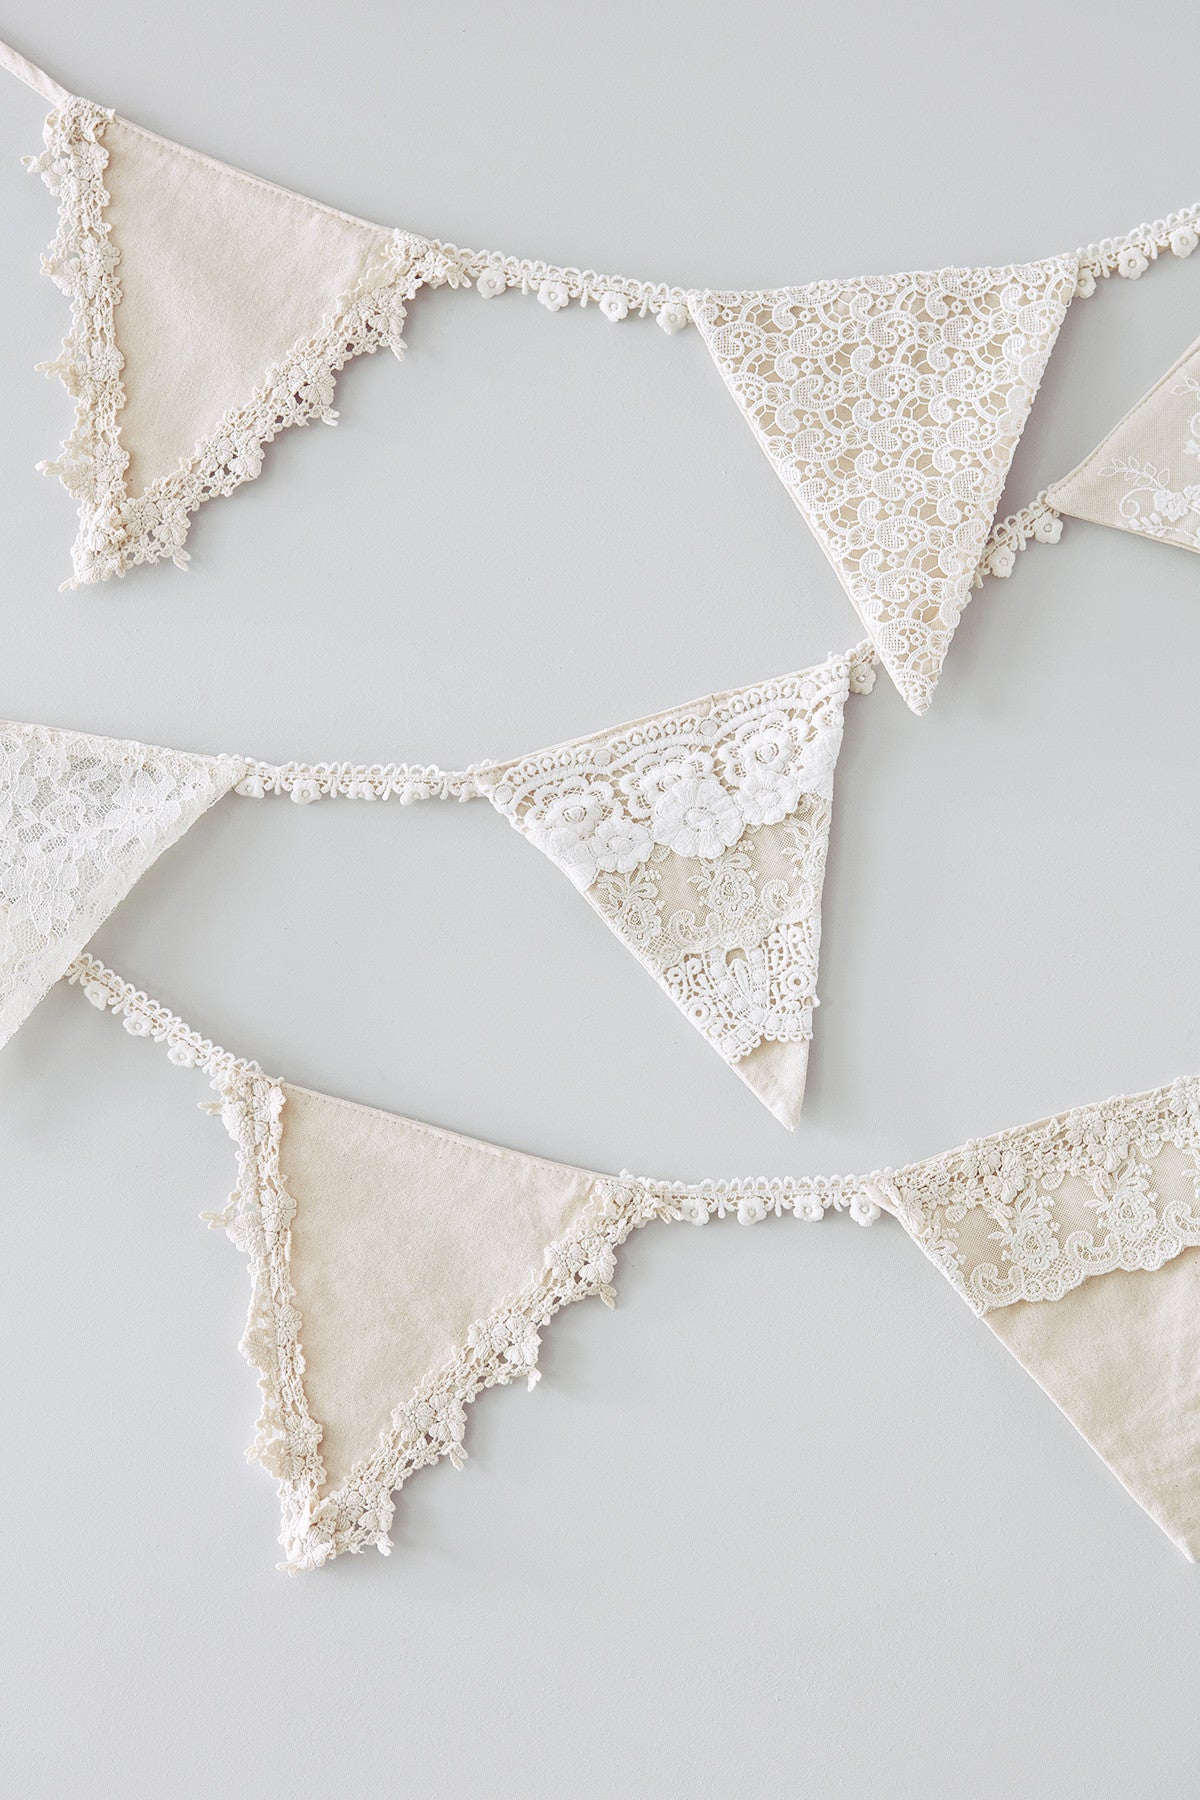 Linen and Lace Bunting